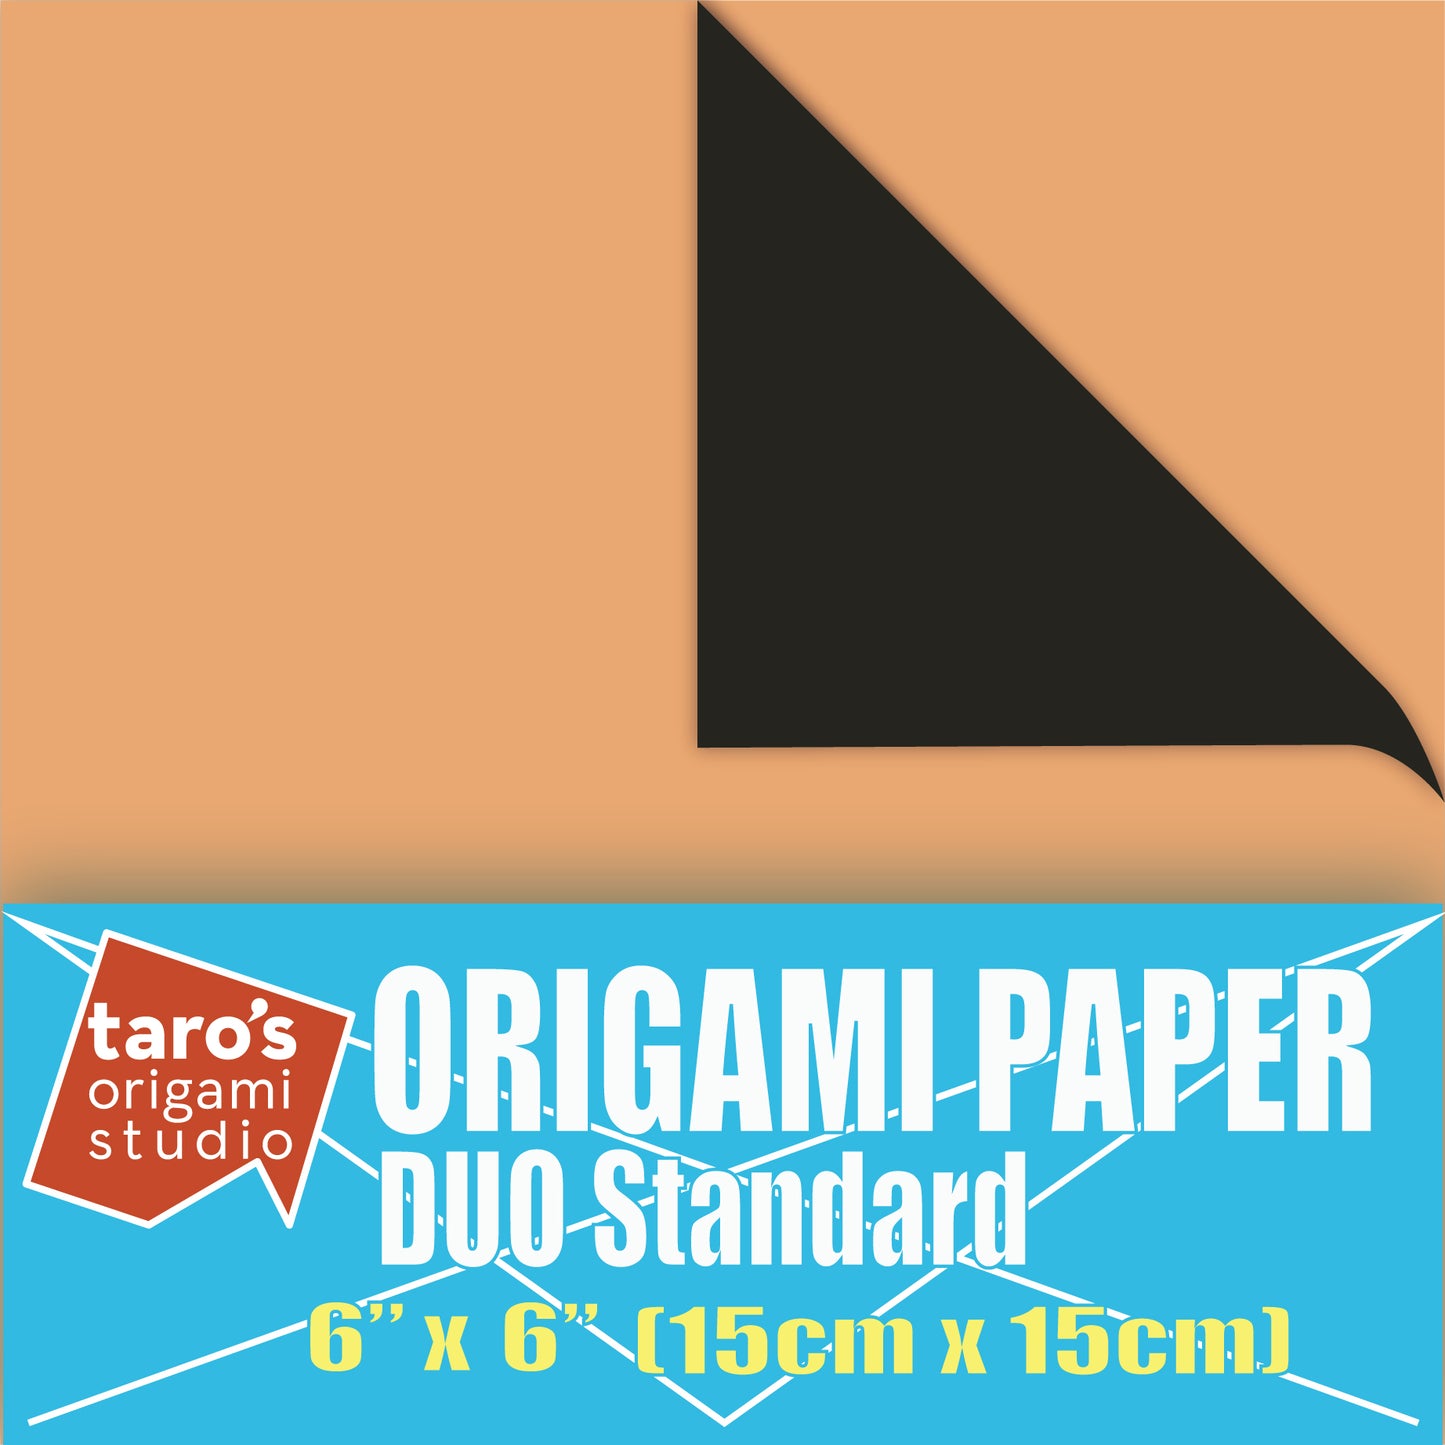 [Taro's Origami Studio] Duo Black/Pale Orange (Diffrent Colors On Each Side) Double Sided Standard 6 Inch (15 cm) Kami Paper with Color Change Patterns, 50 Sheets (Made in Japan)